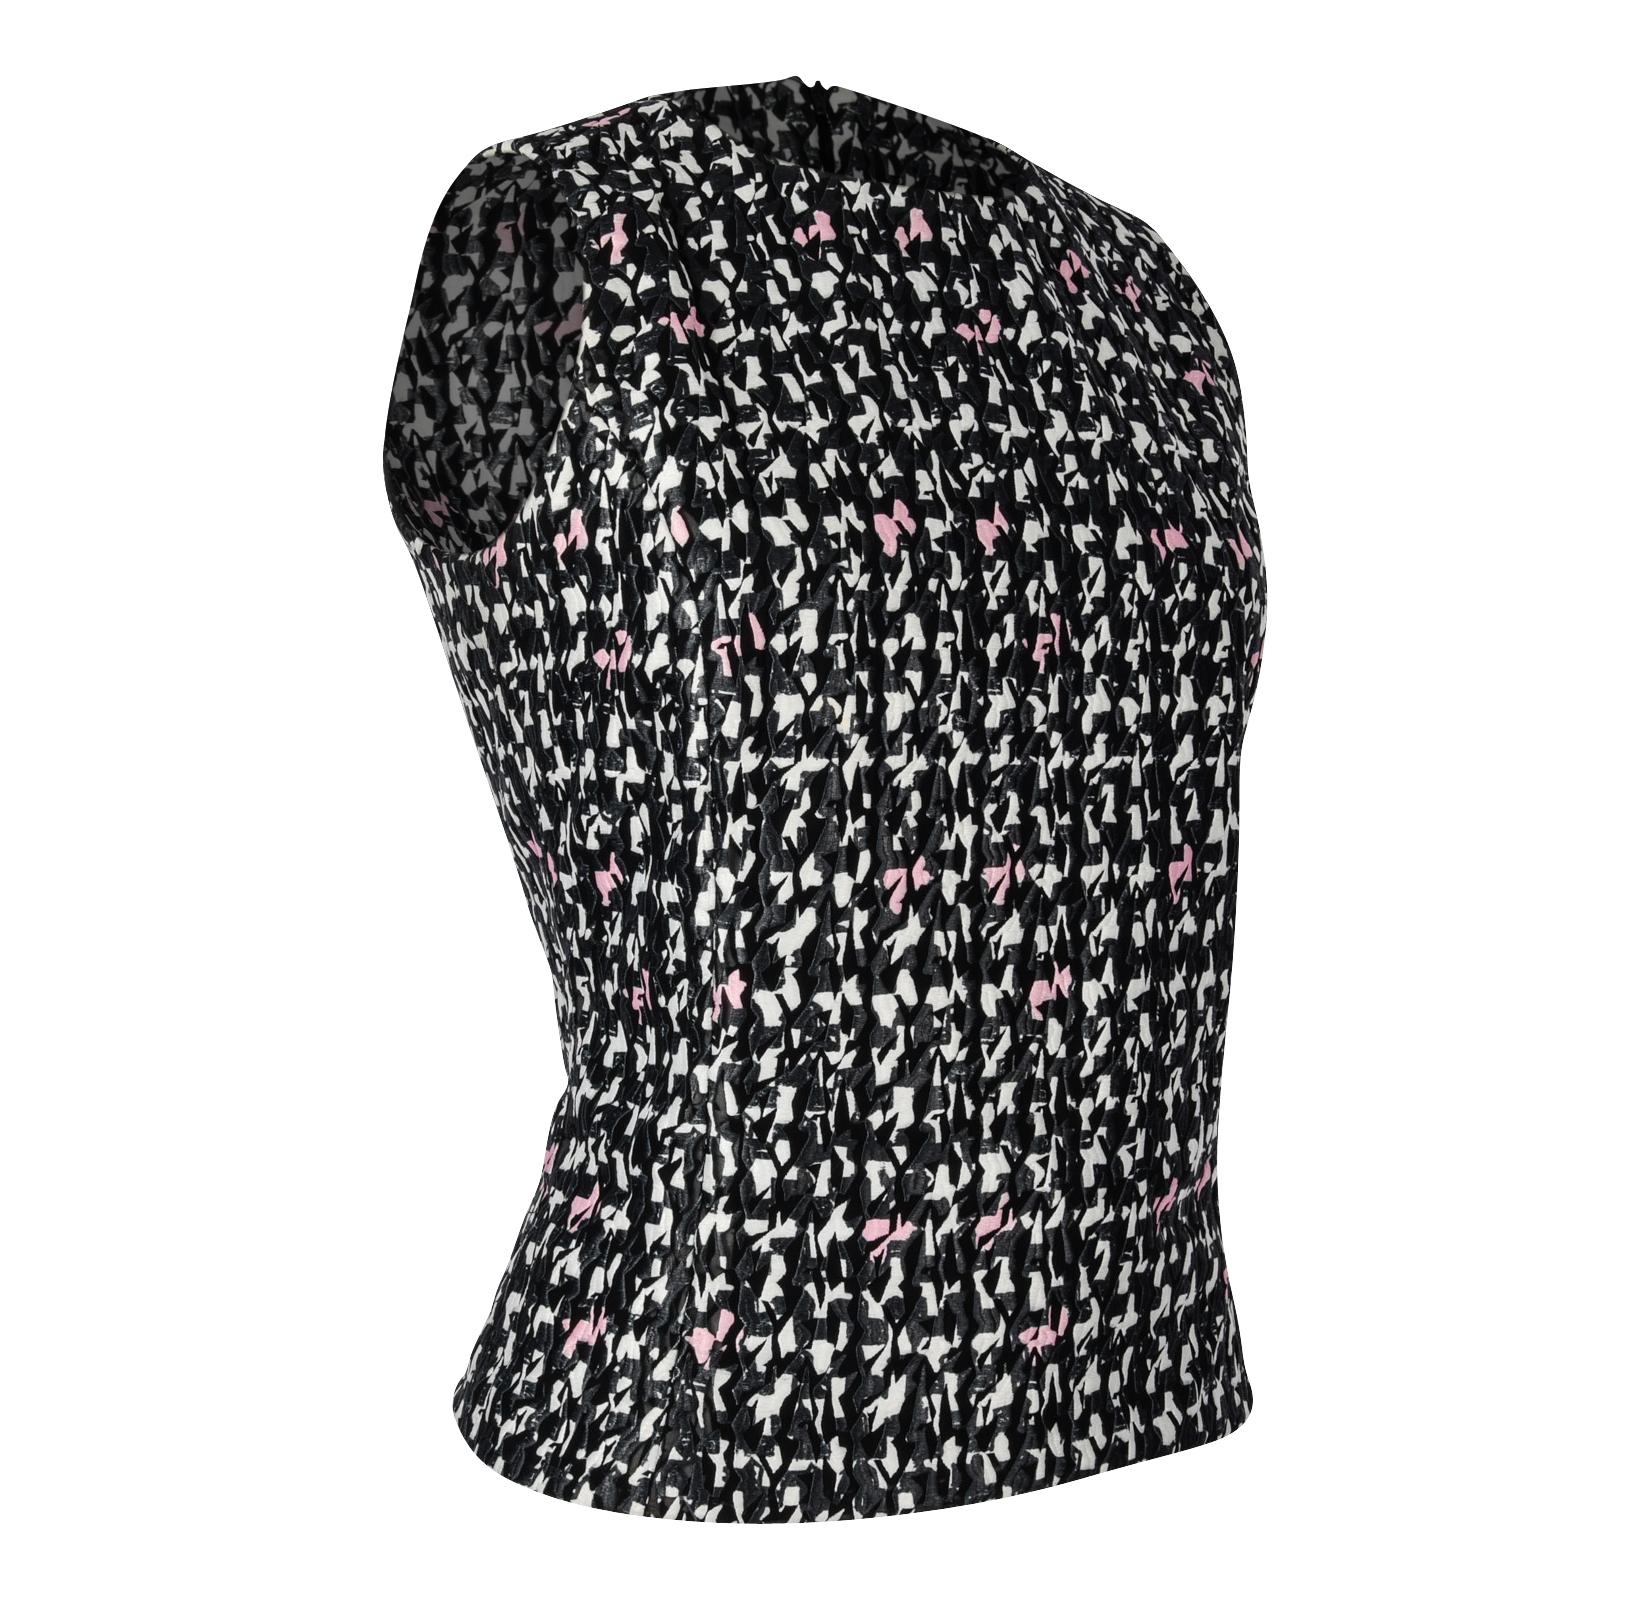 Guaranteed authentic Christian Dior fantasy tweed print fitted sleeveless top. 
Textured print in black, grey, white and pink.
Jewel neckline and hidden rear zip.
No fabric or size tag. 
final sale

SIZE fits 8

TOP MEASURES: 
LENGTH  21.5